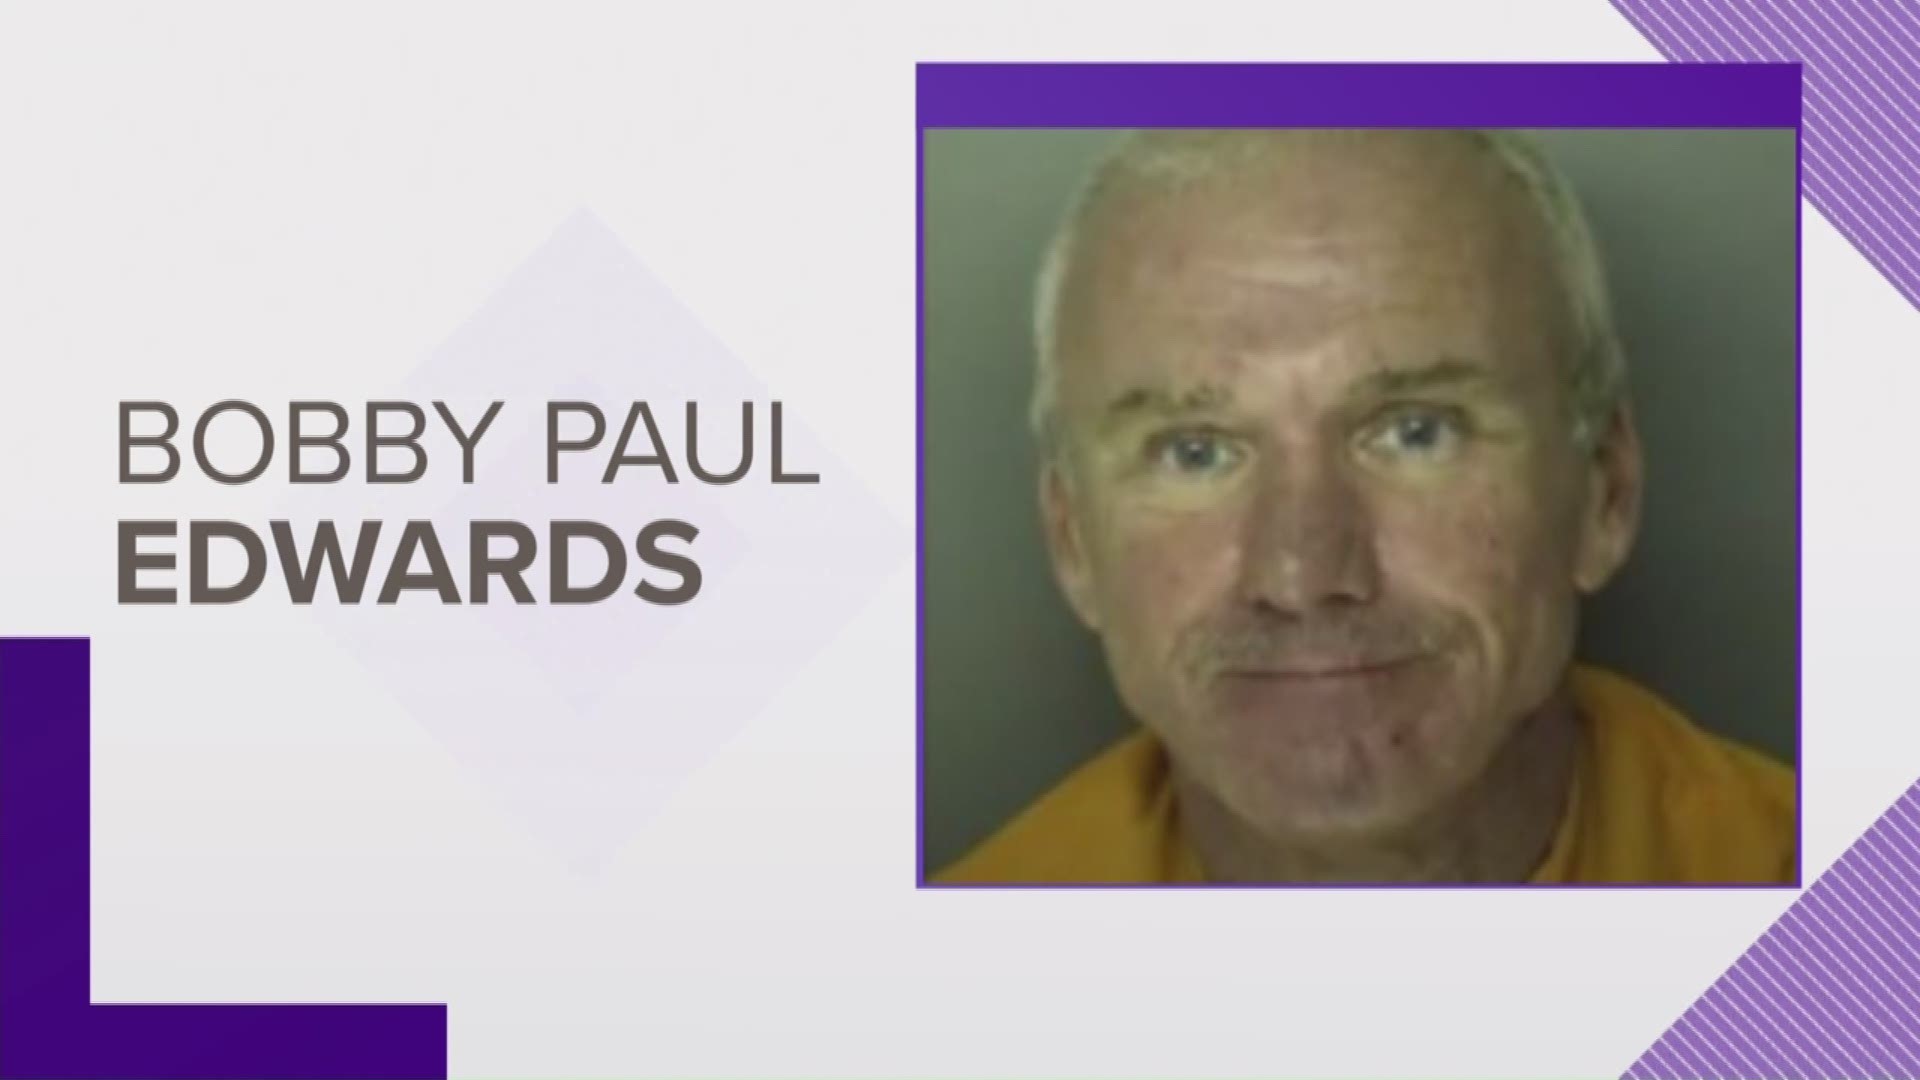 According to a report, 53-year-old Bobby Paul Edwards used violence, threats, isolation and intimidation to make a man with an intellectual disability work over 100 hours a week without pay.